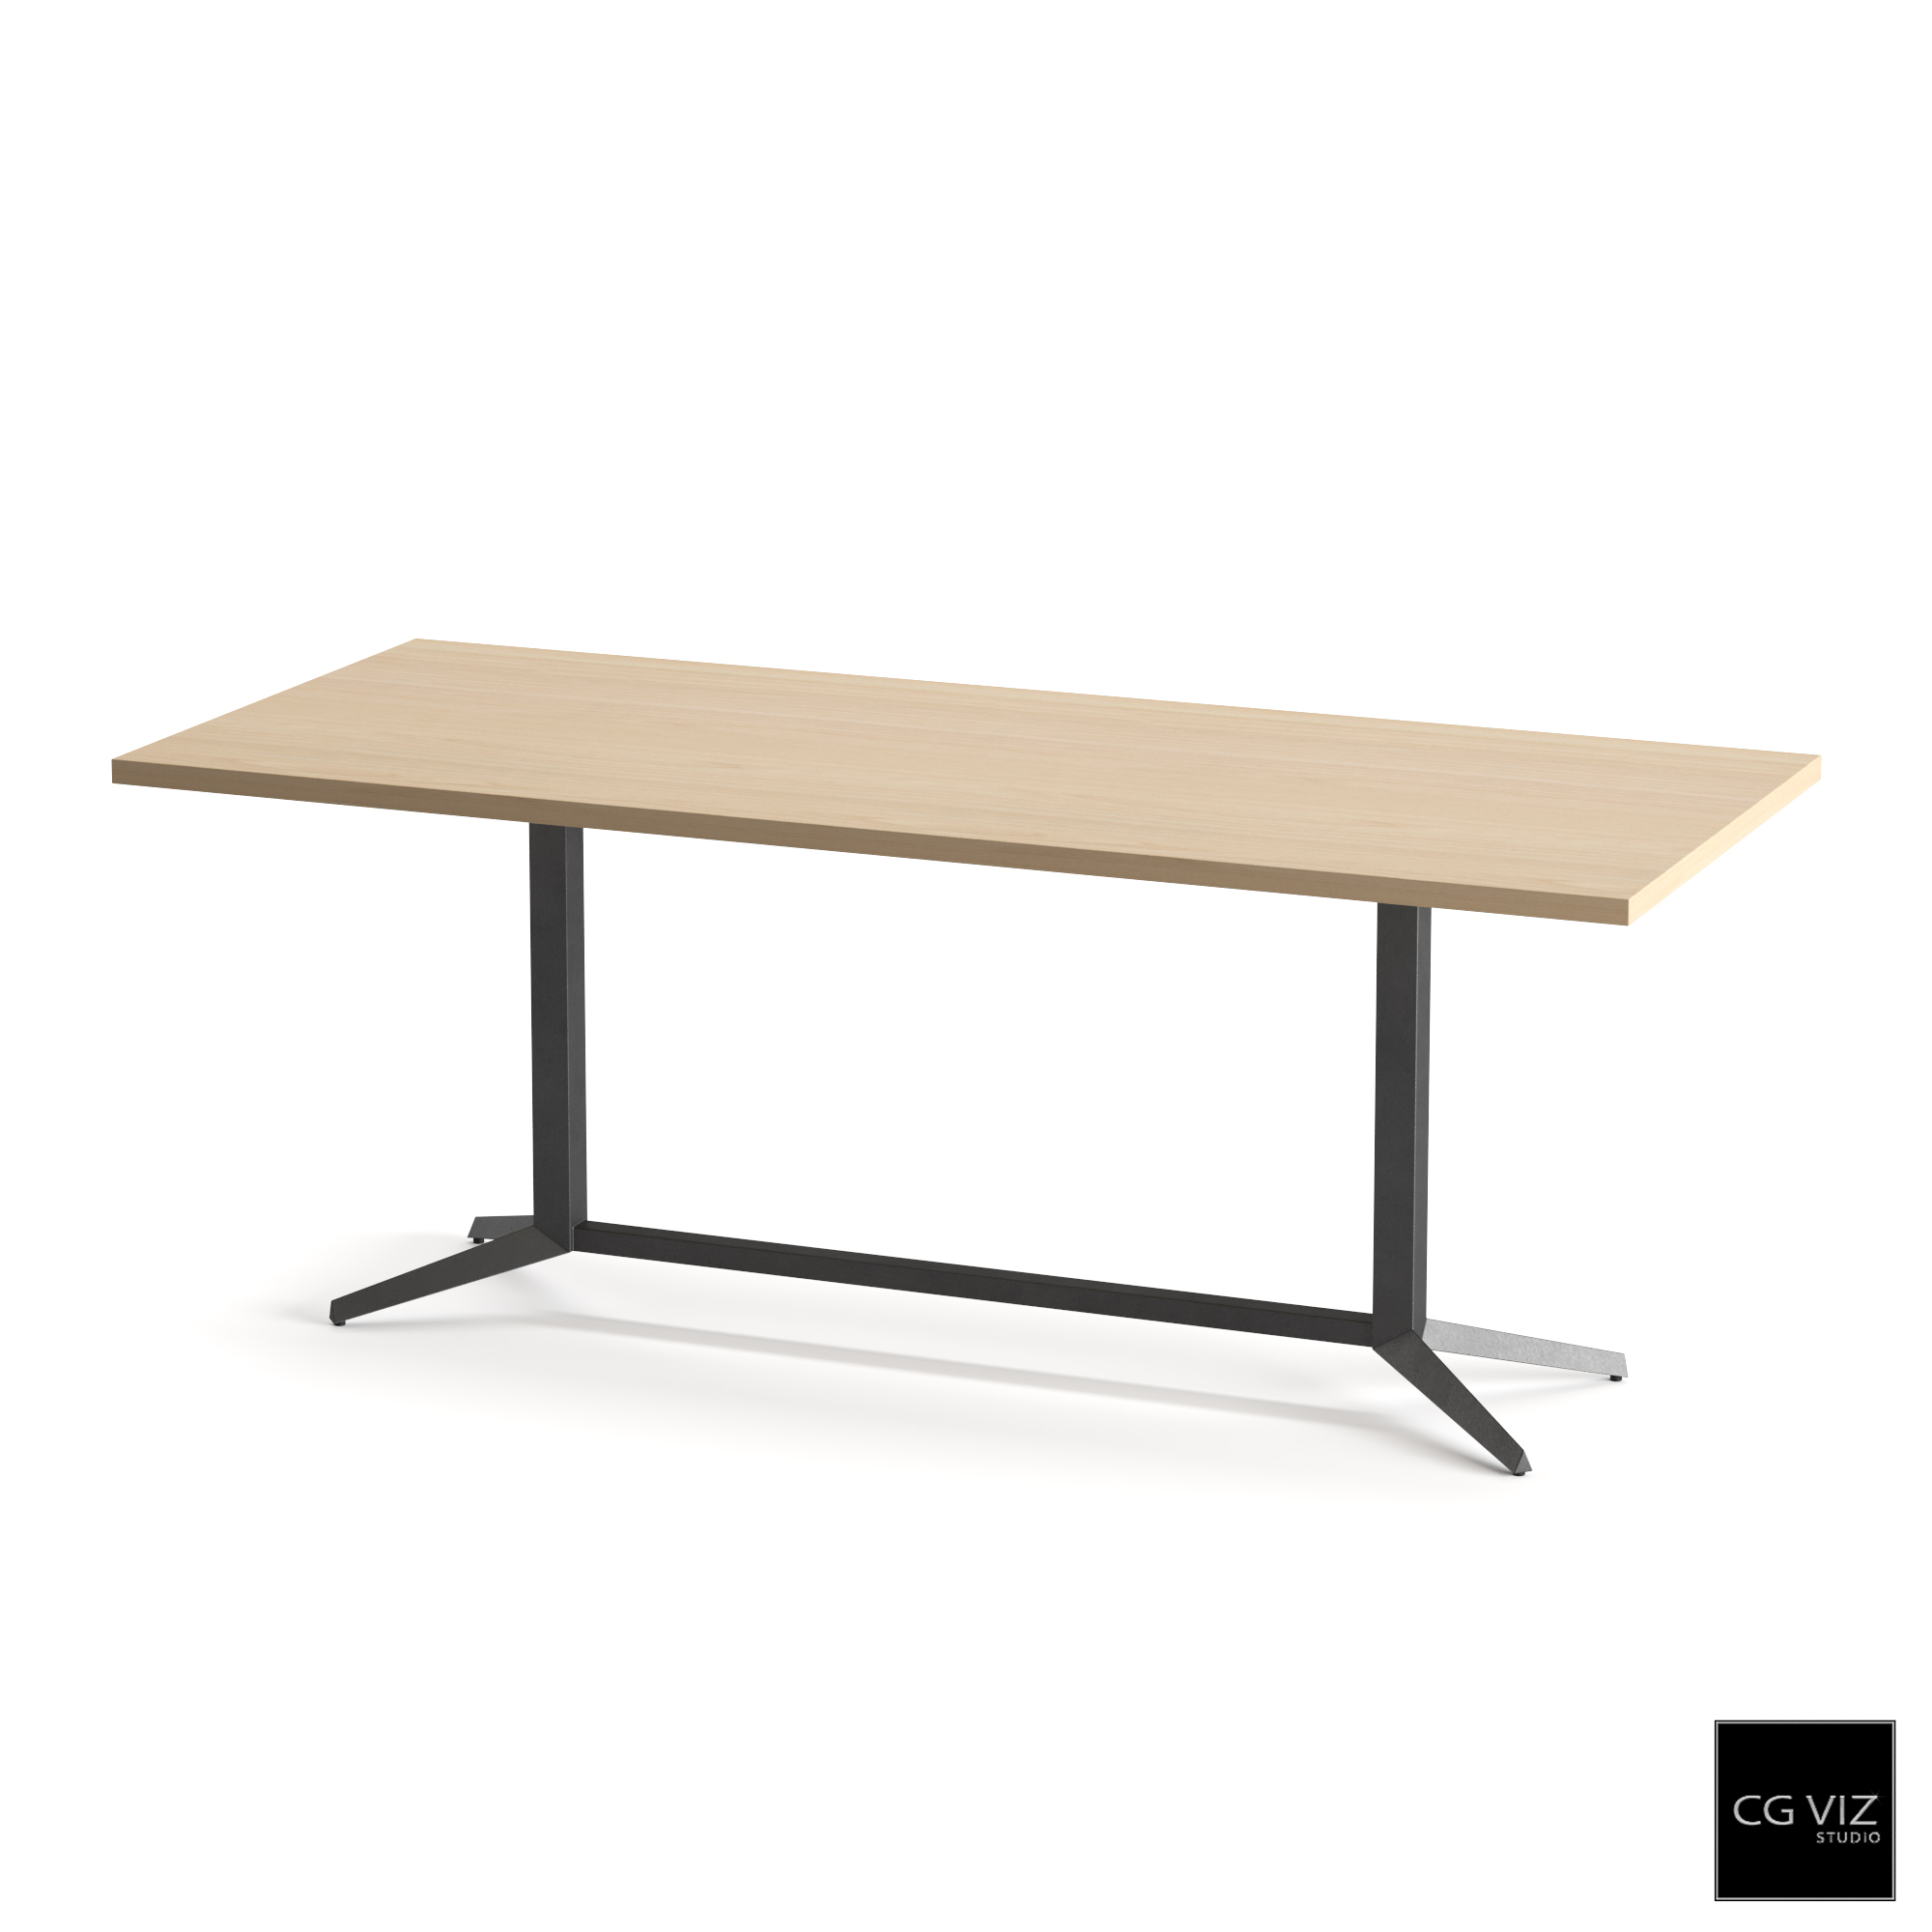 Rendered Preview of Knoll Dividends Horizon Y-Base Table 3D Model by CG Viz Studio